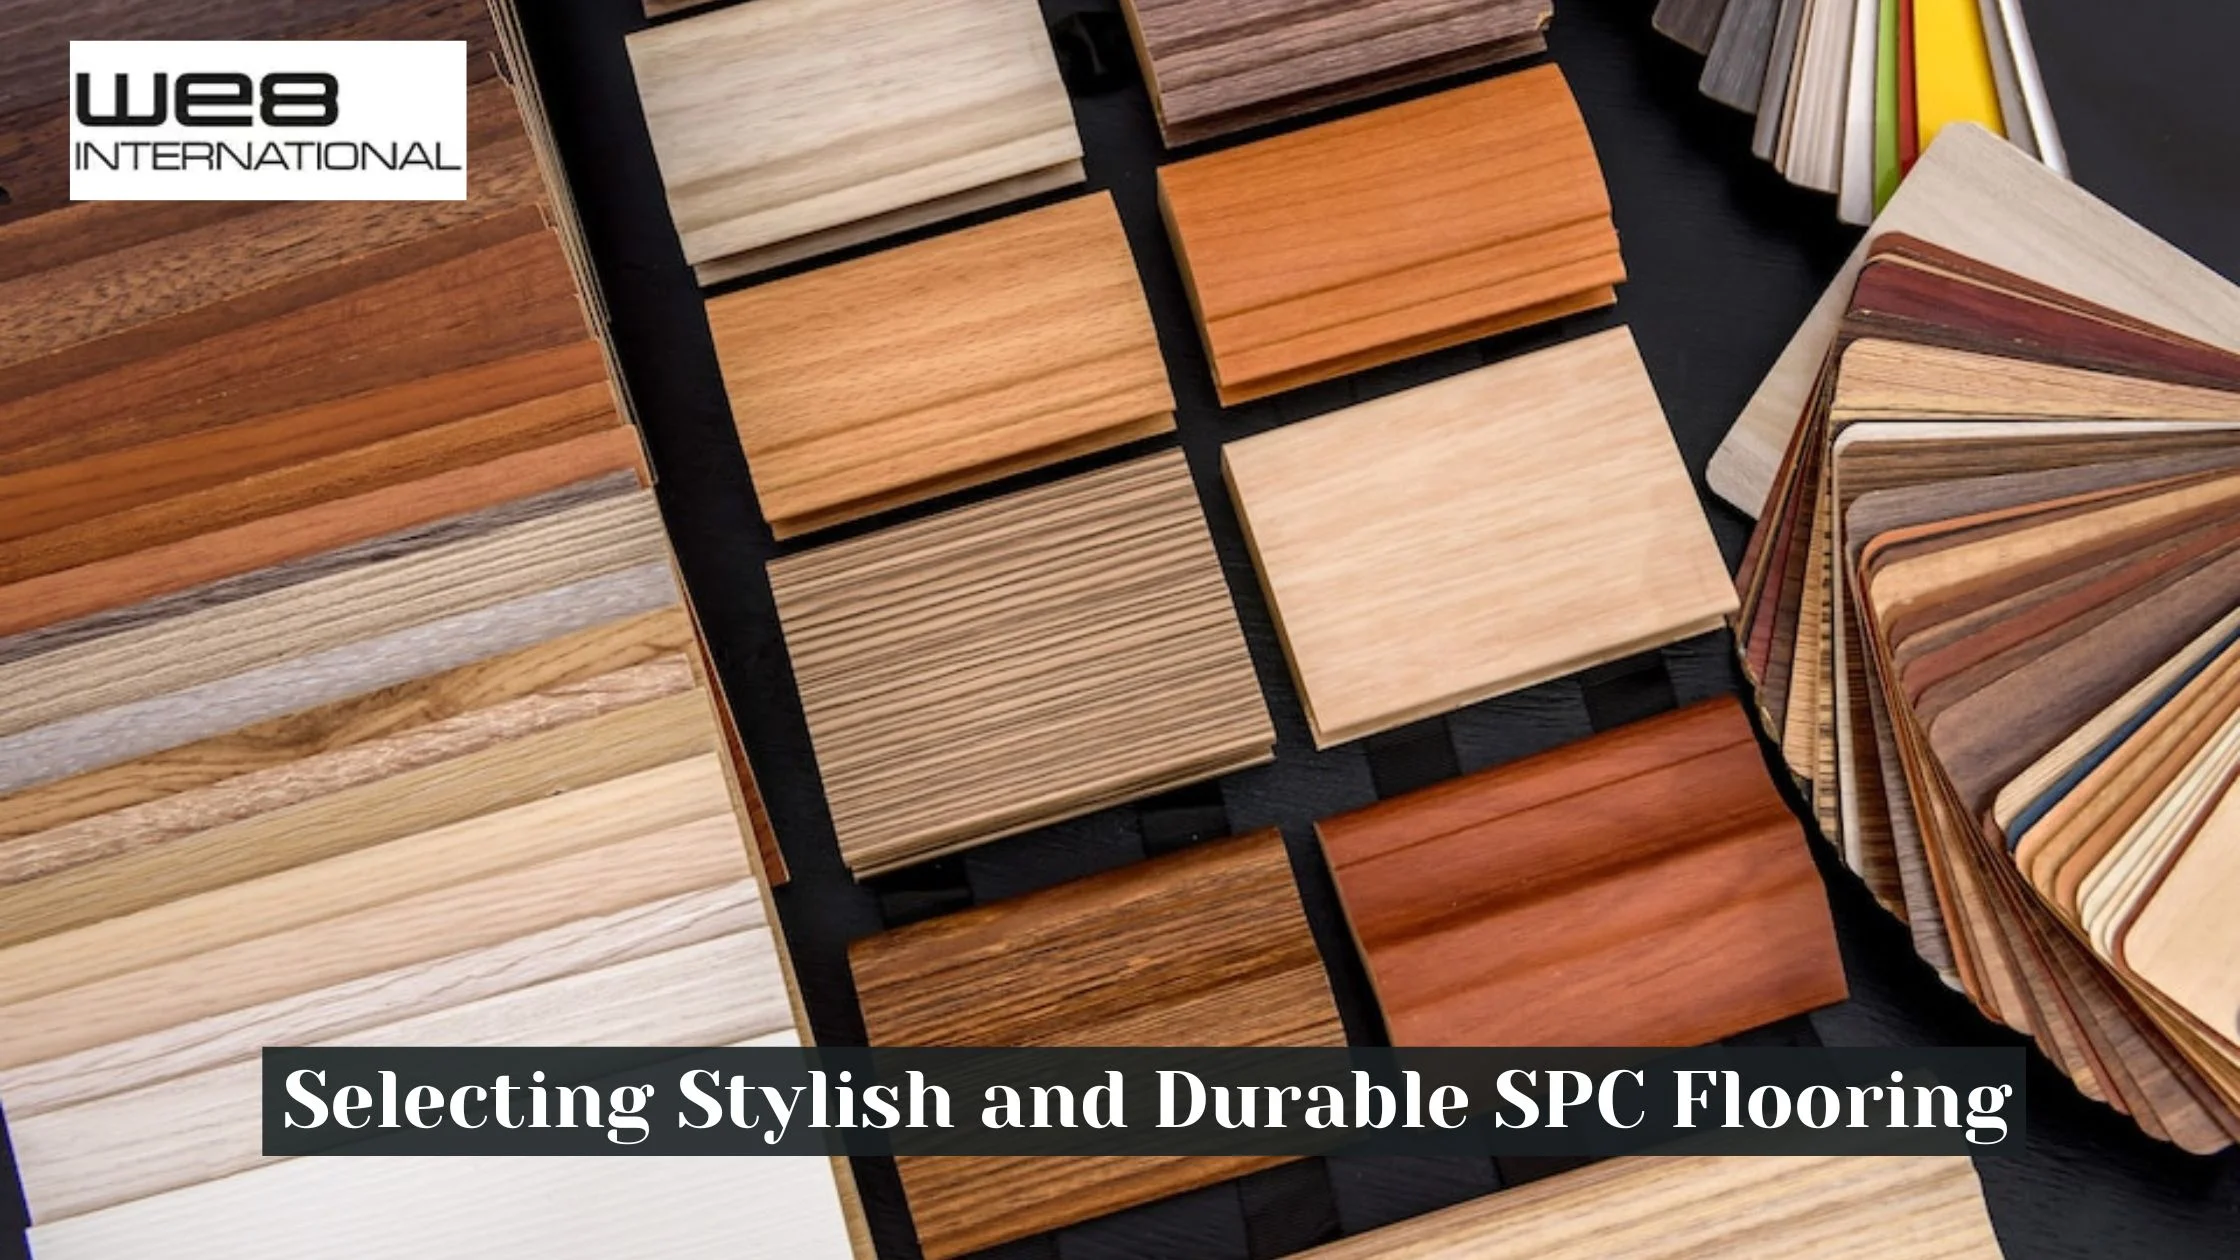 Selecting Stylish and Durable SPC Flooring